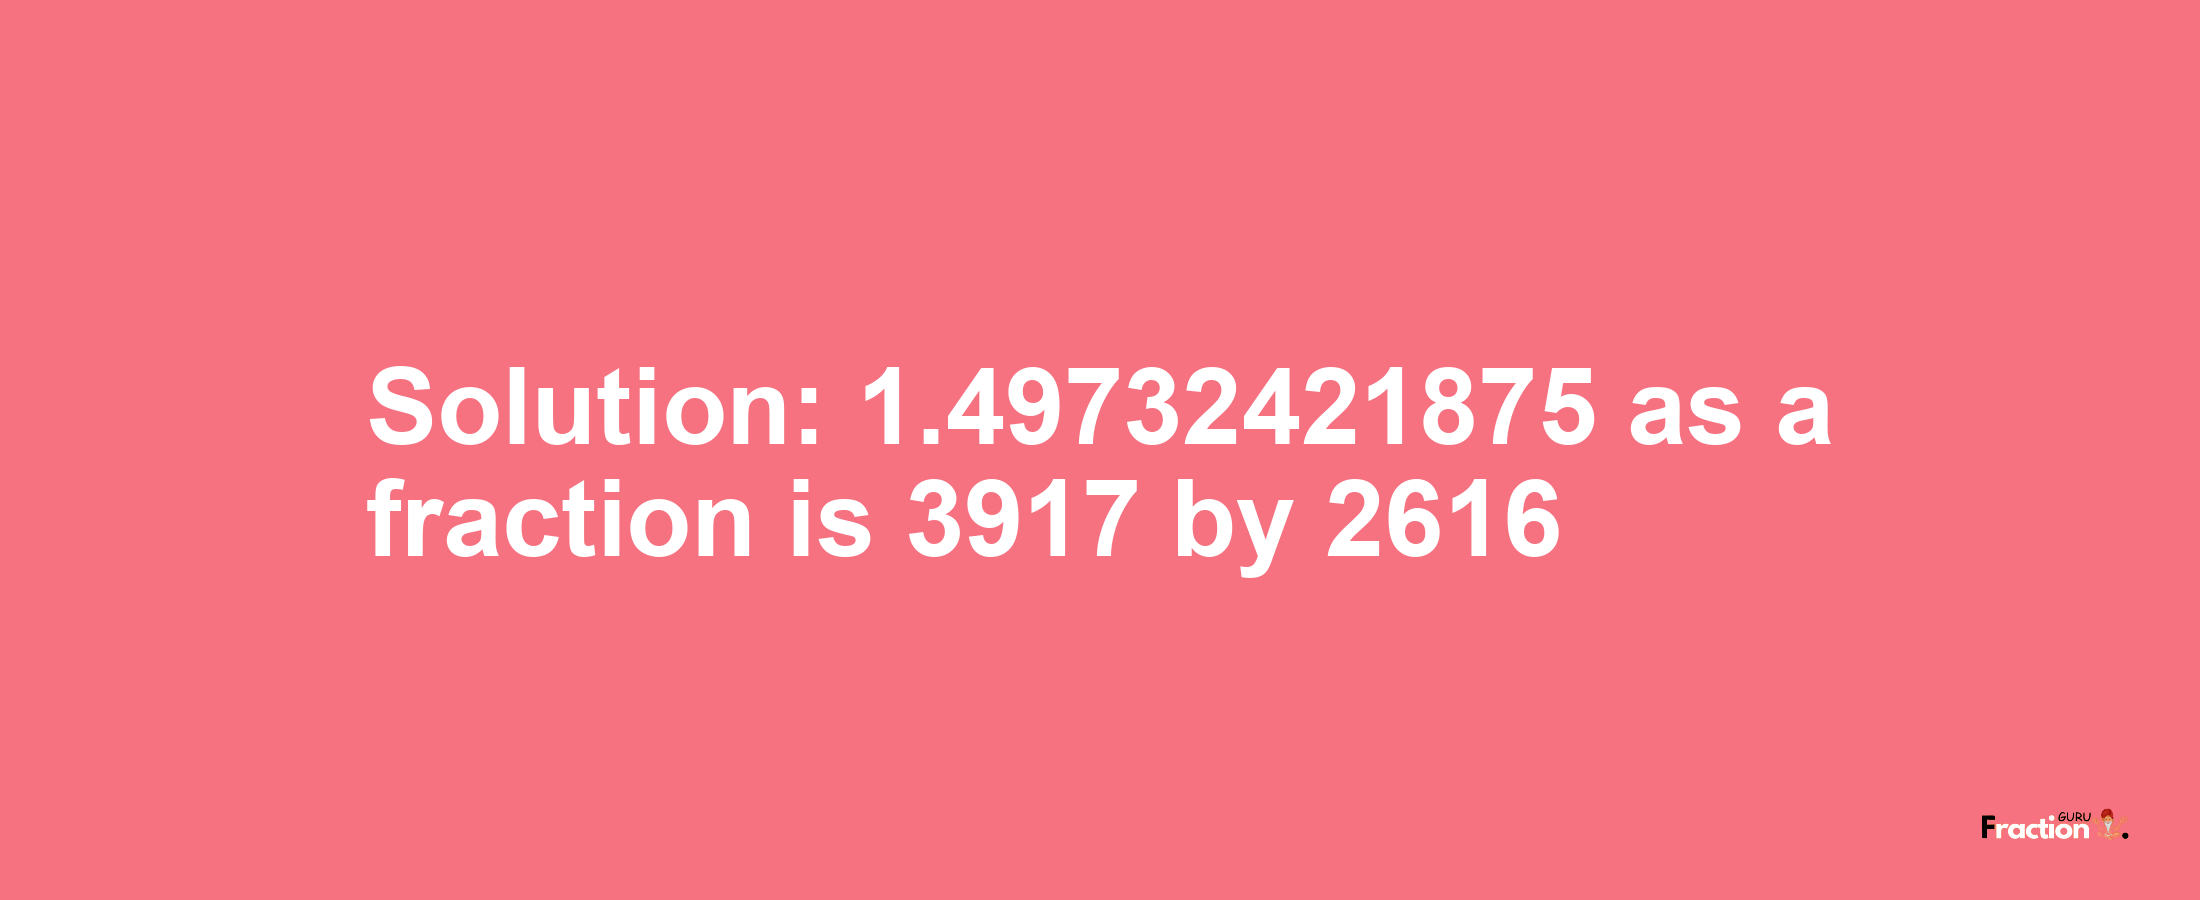 Solution:1.49732421875 as a fraction is 3917/2616